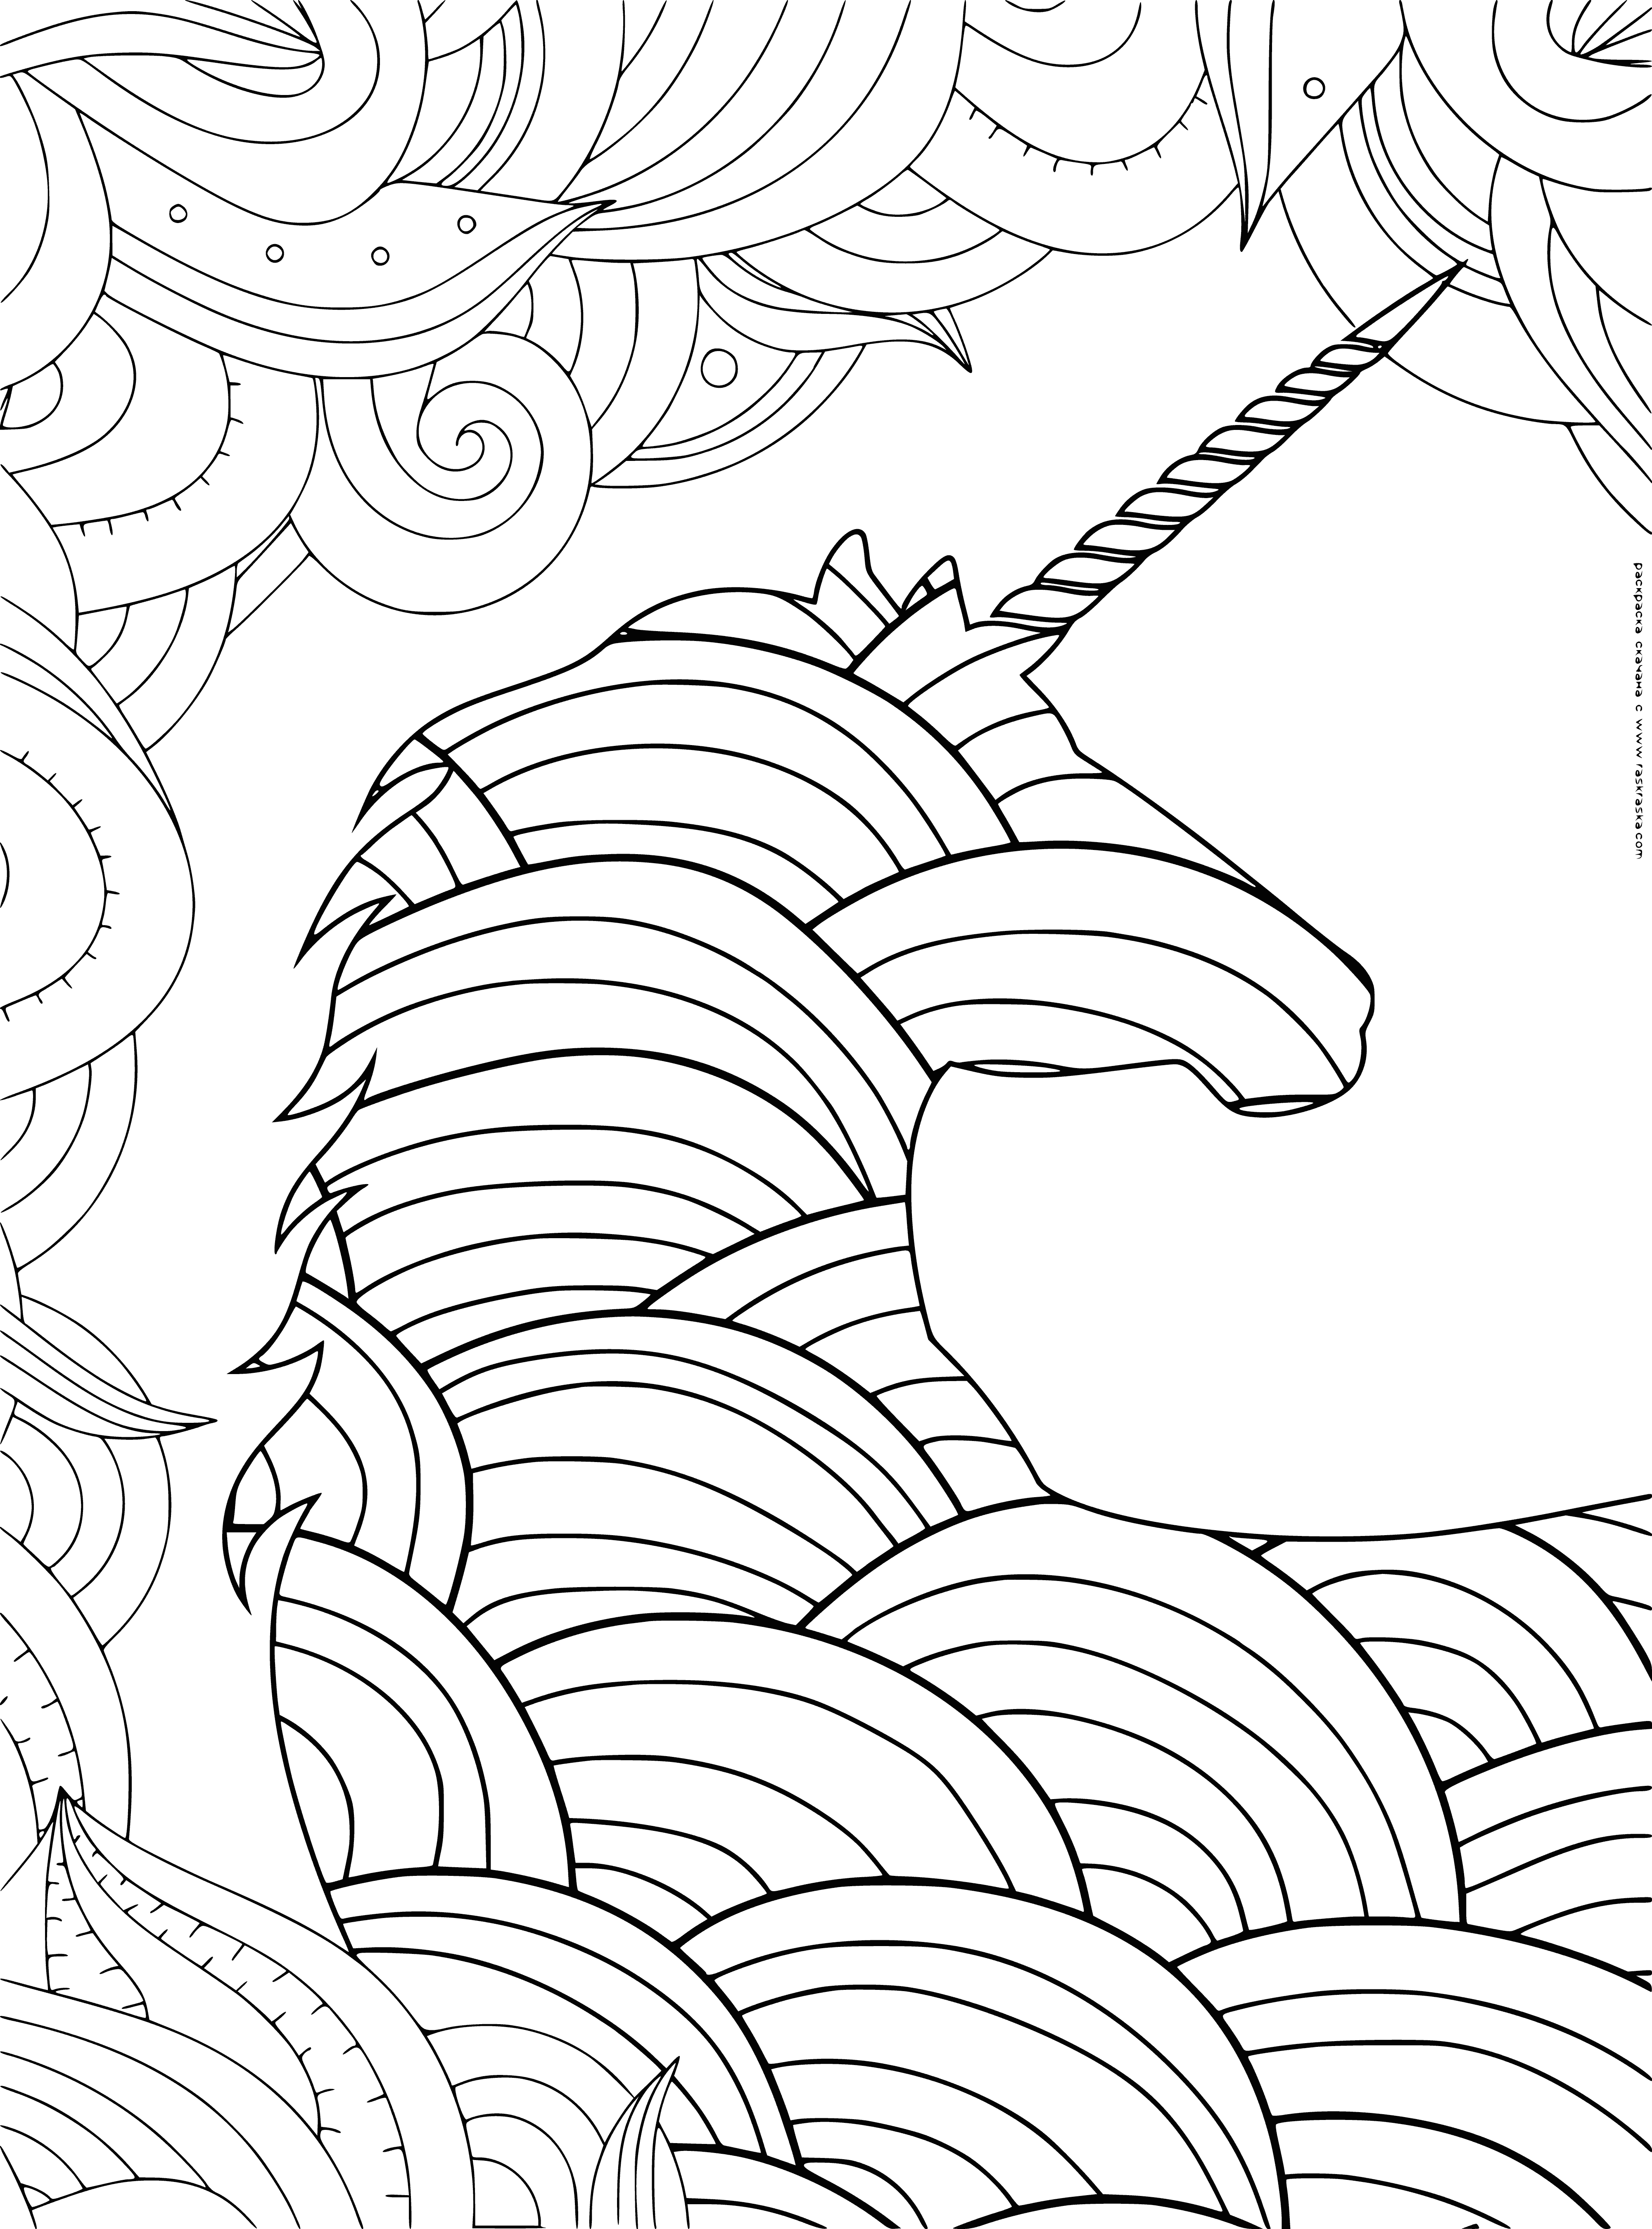 coloring page: Creative anti-stress unicorns colouring page - A majestic creature surrounded by stars & sparkles, perfect for a peaceful & calming colouring experience.